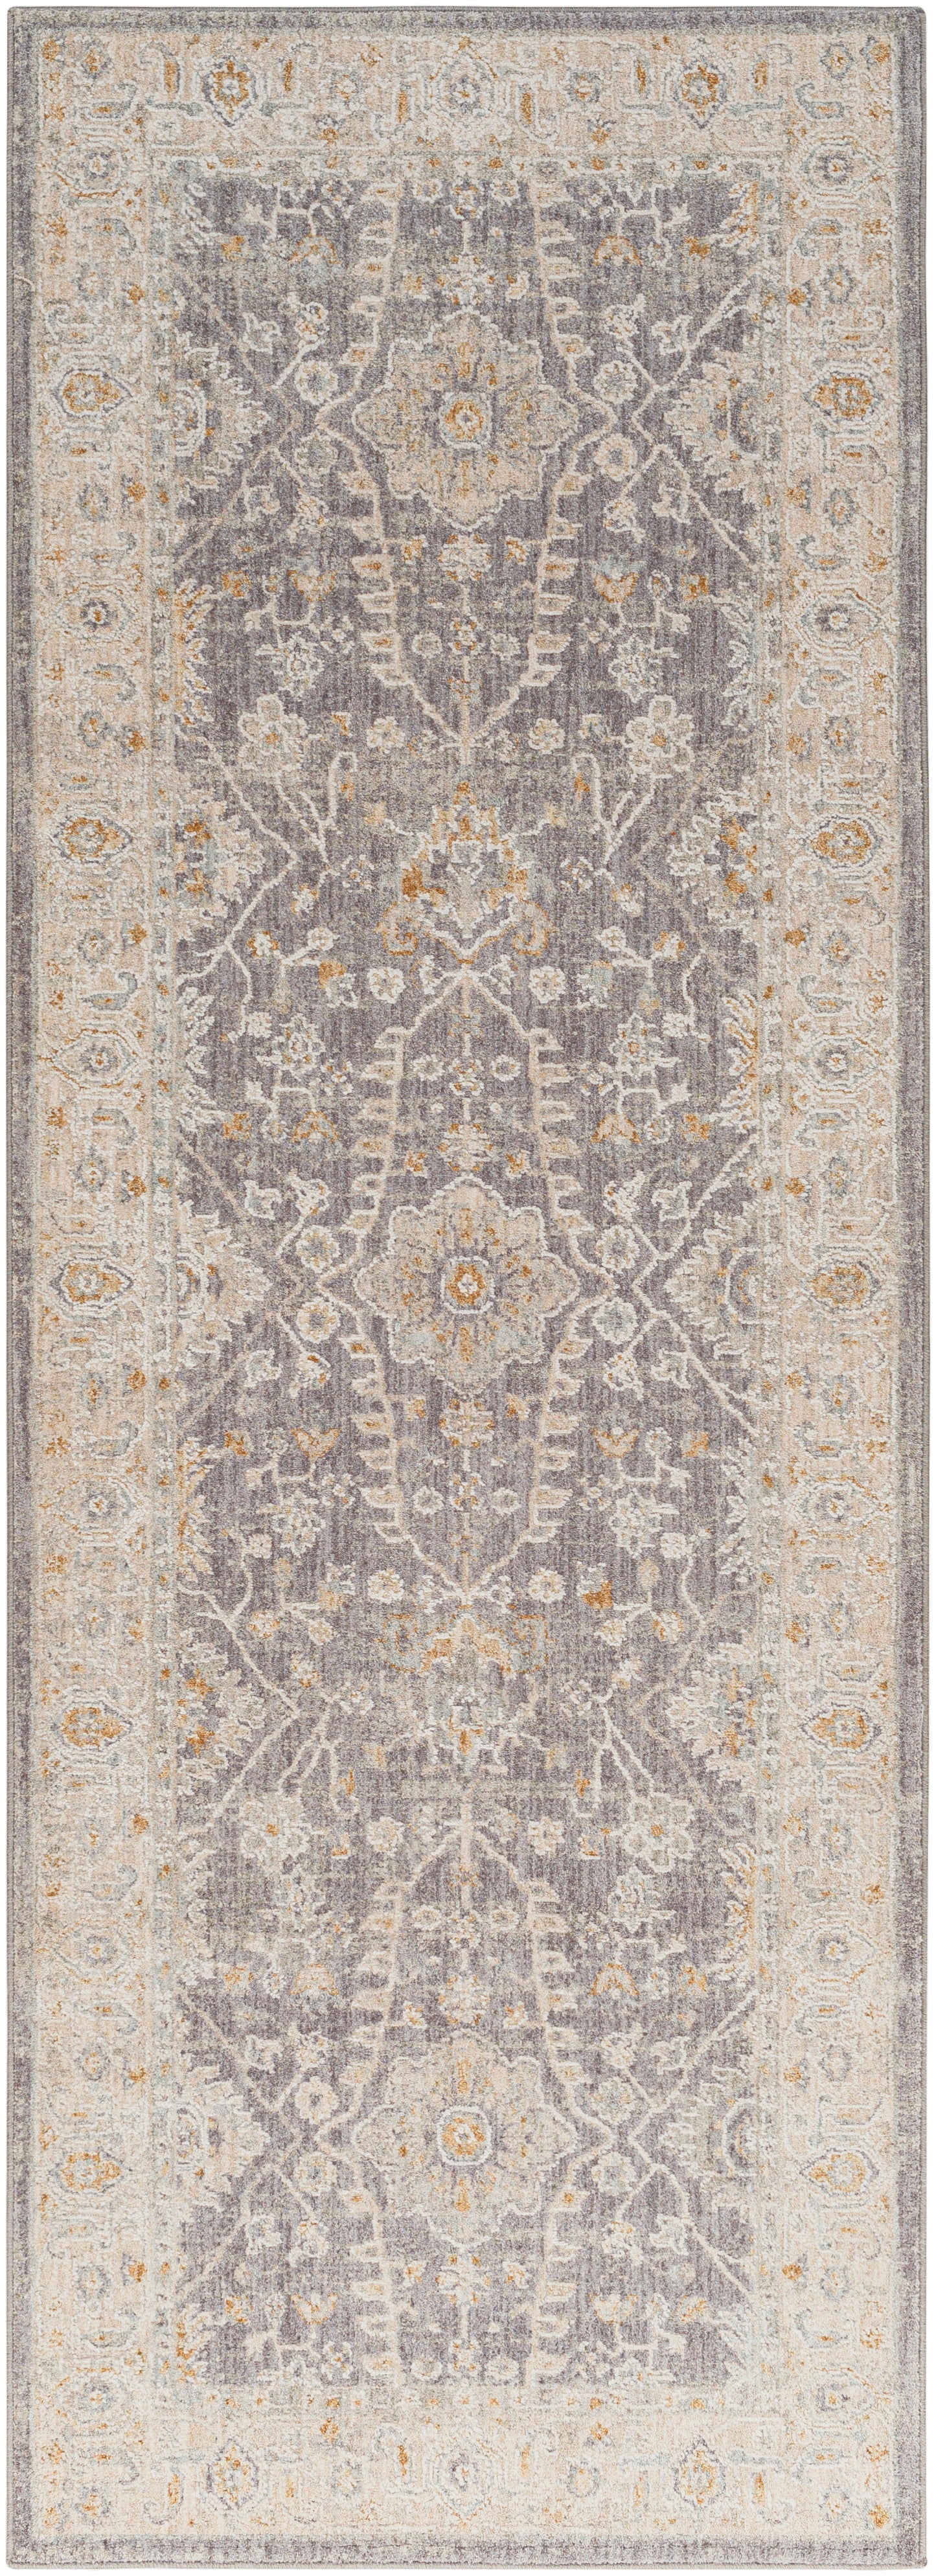 Avant Garde 30596 Machine Woven Synthetic Blend Indoor Area Rug by Surya Rugs